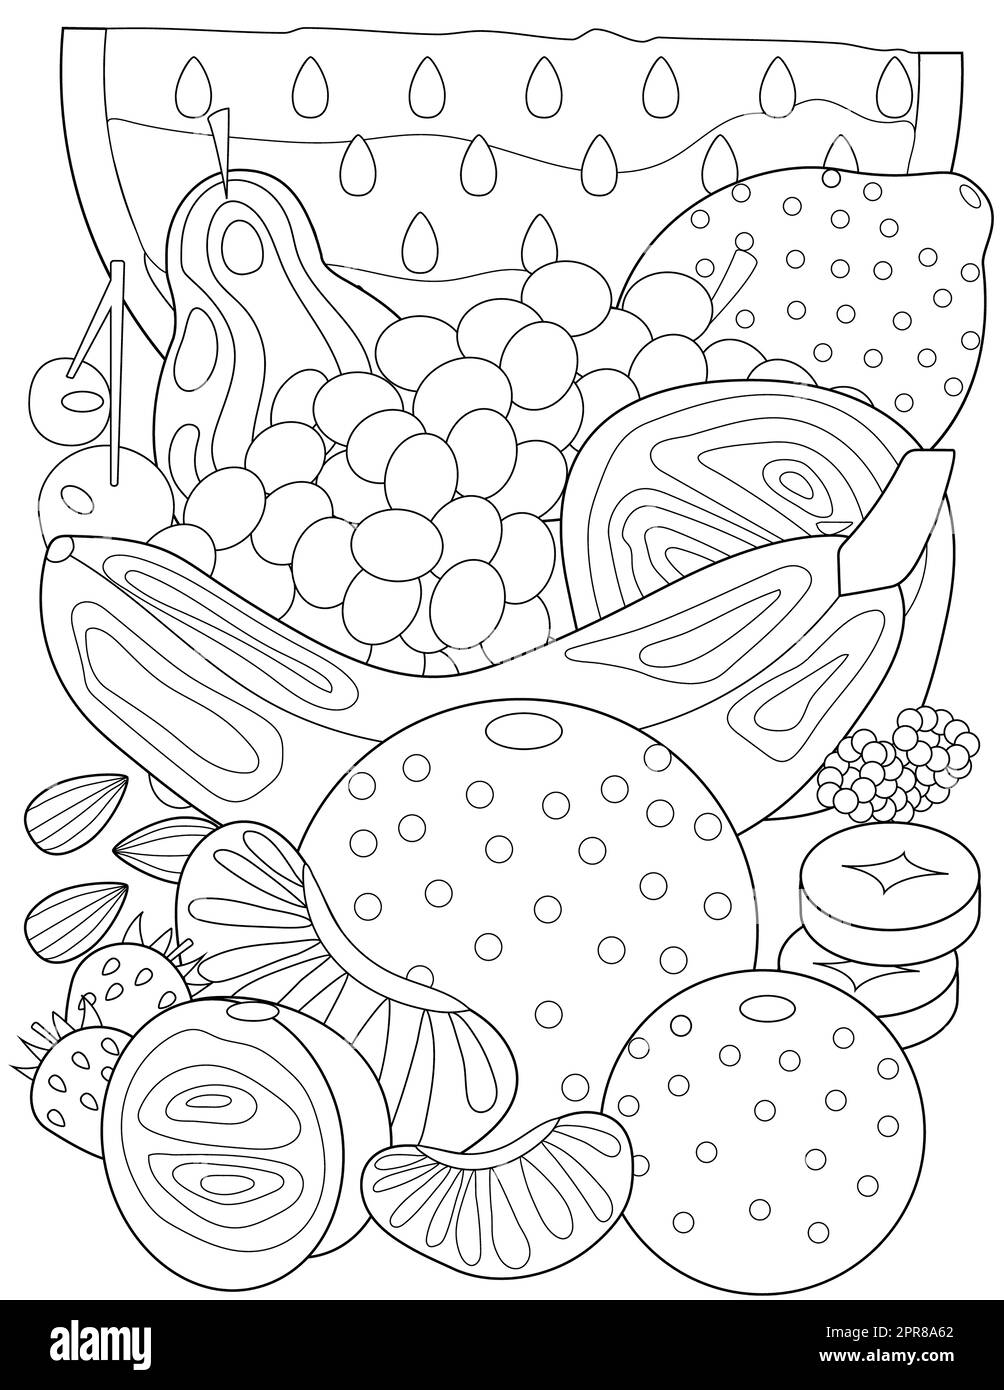 Coloring Book Page With Variuos Detailed Fruits And Cookies. Stock Photo